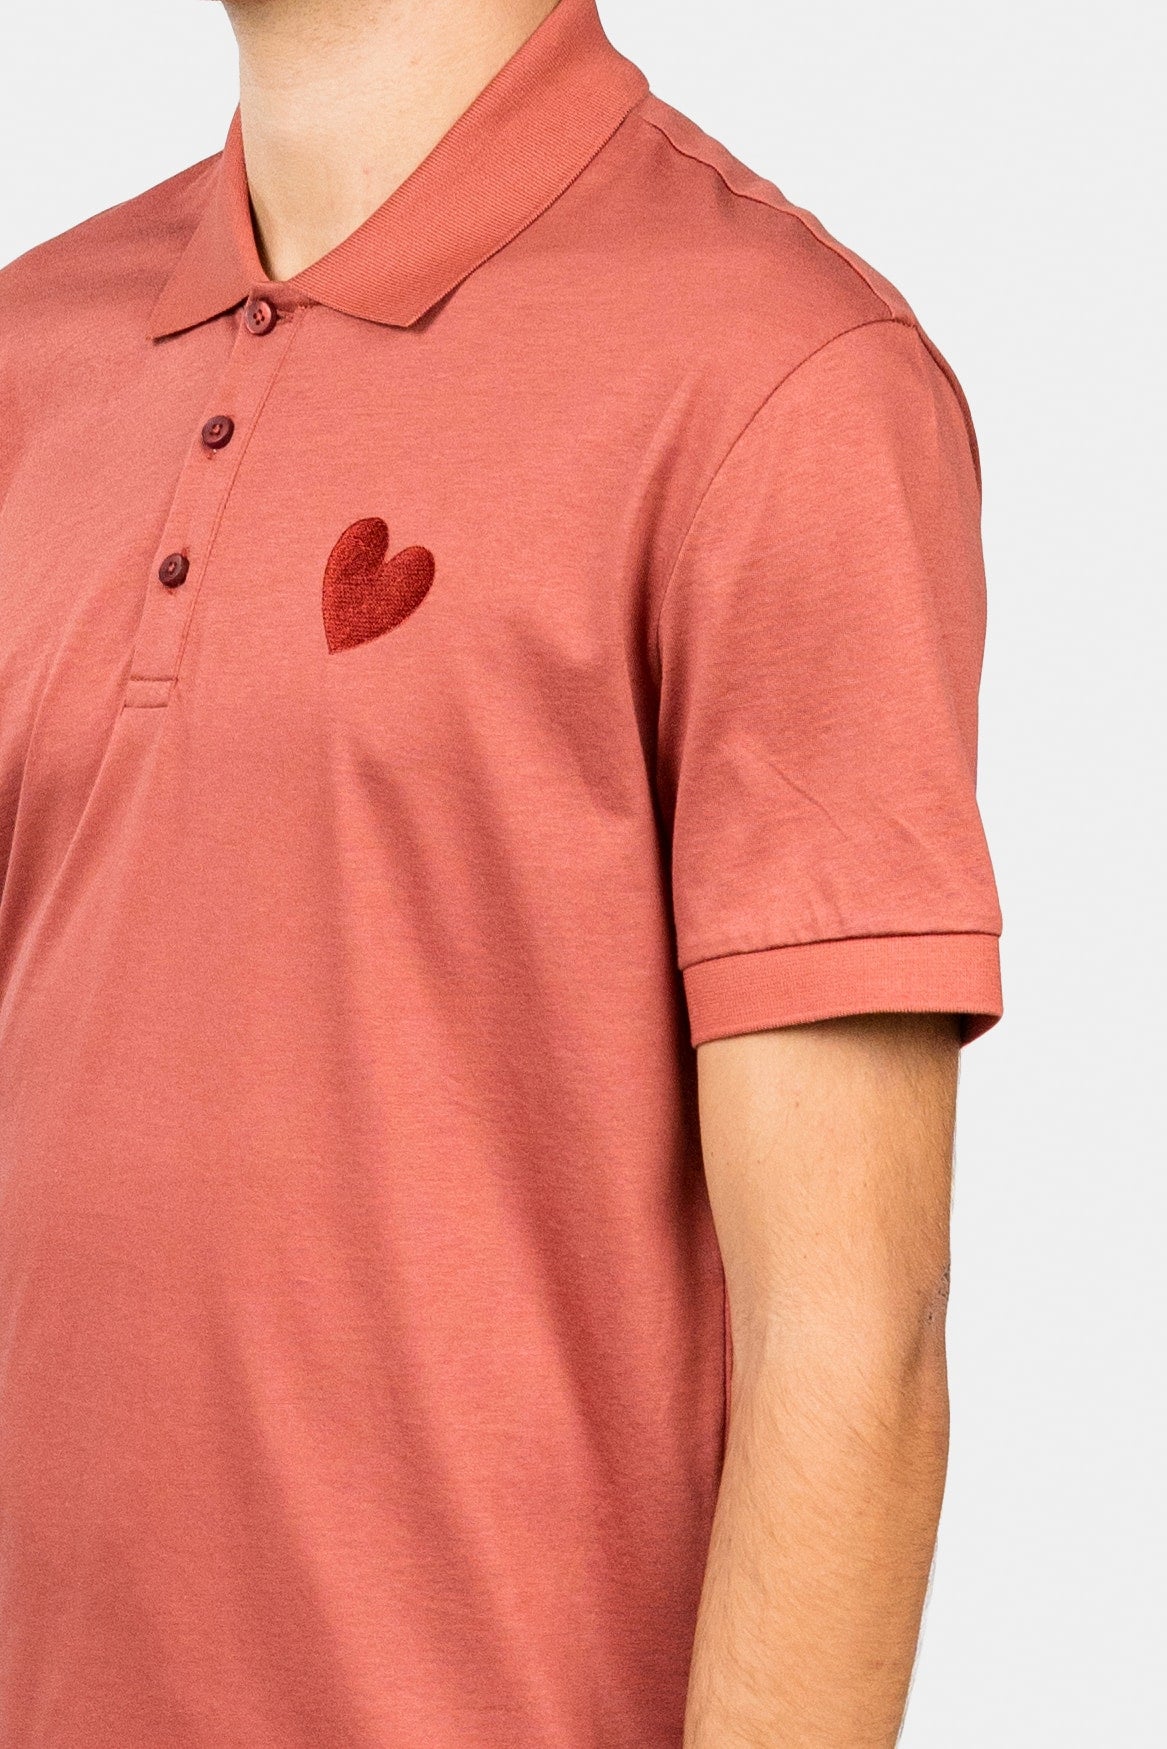 Classic Embroidery Heart Jersey Red Ochre Polo